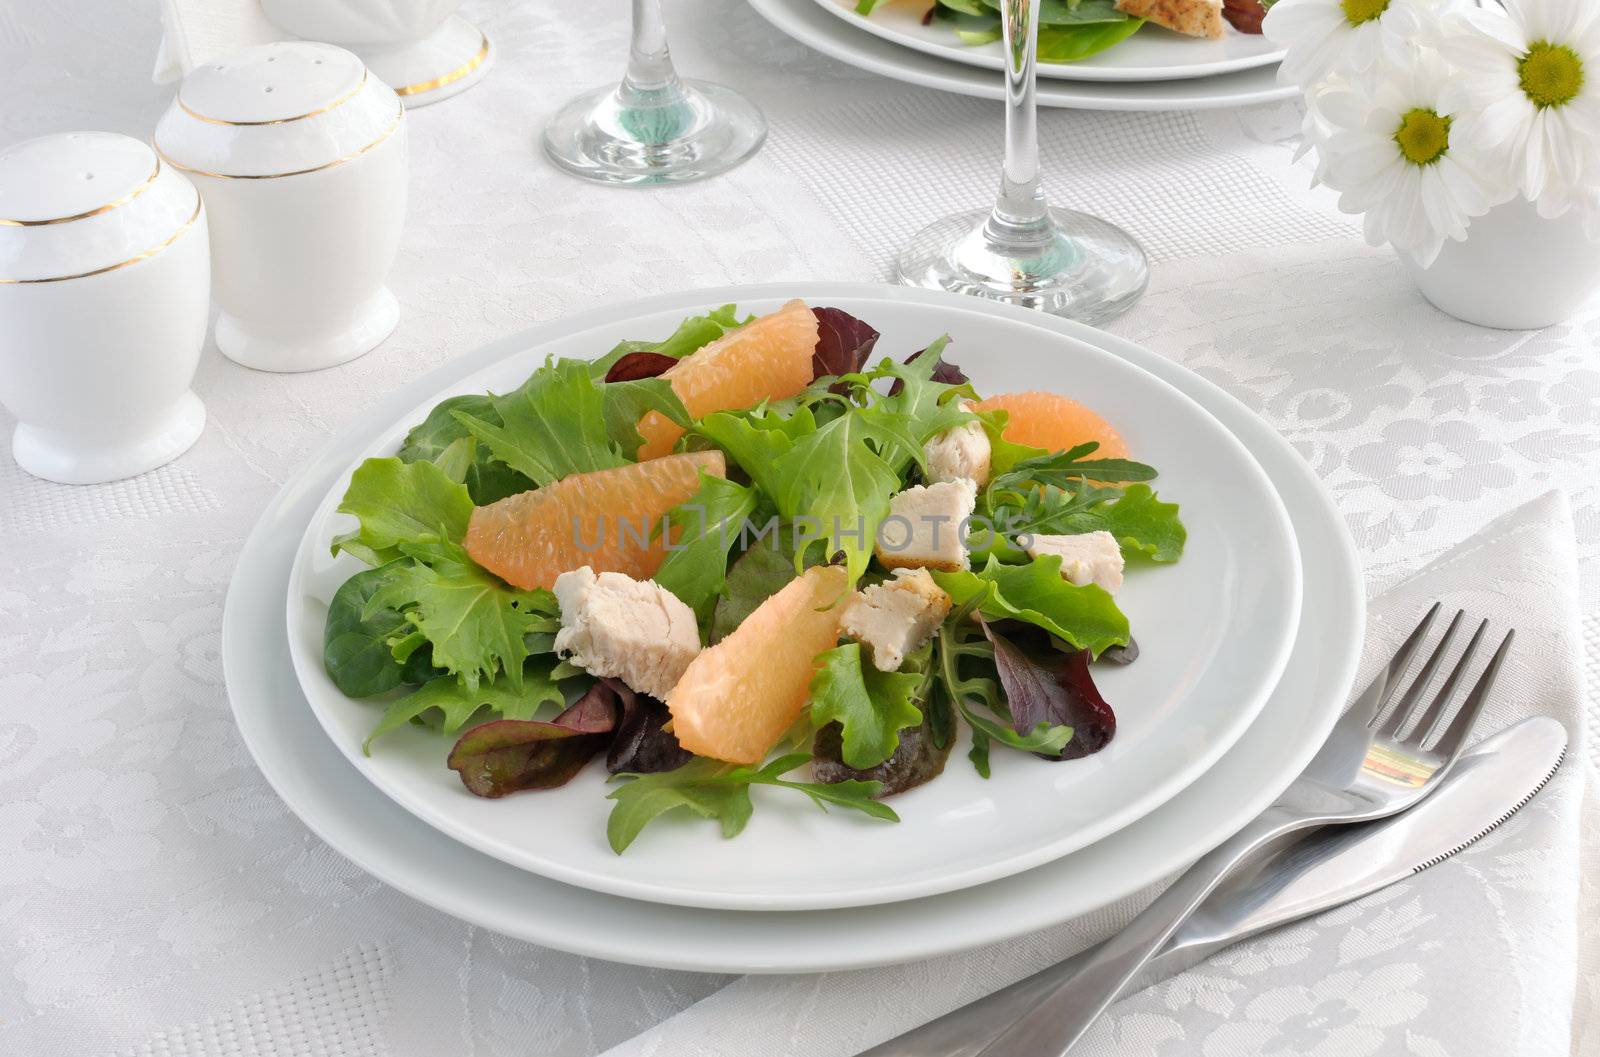  Salad of fresh salad mix with chicken and grapefruit by Apolonia